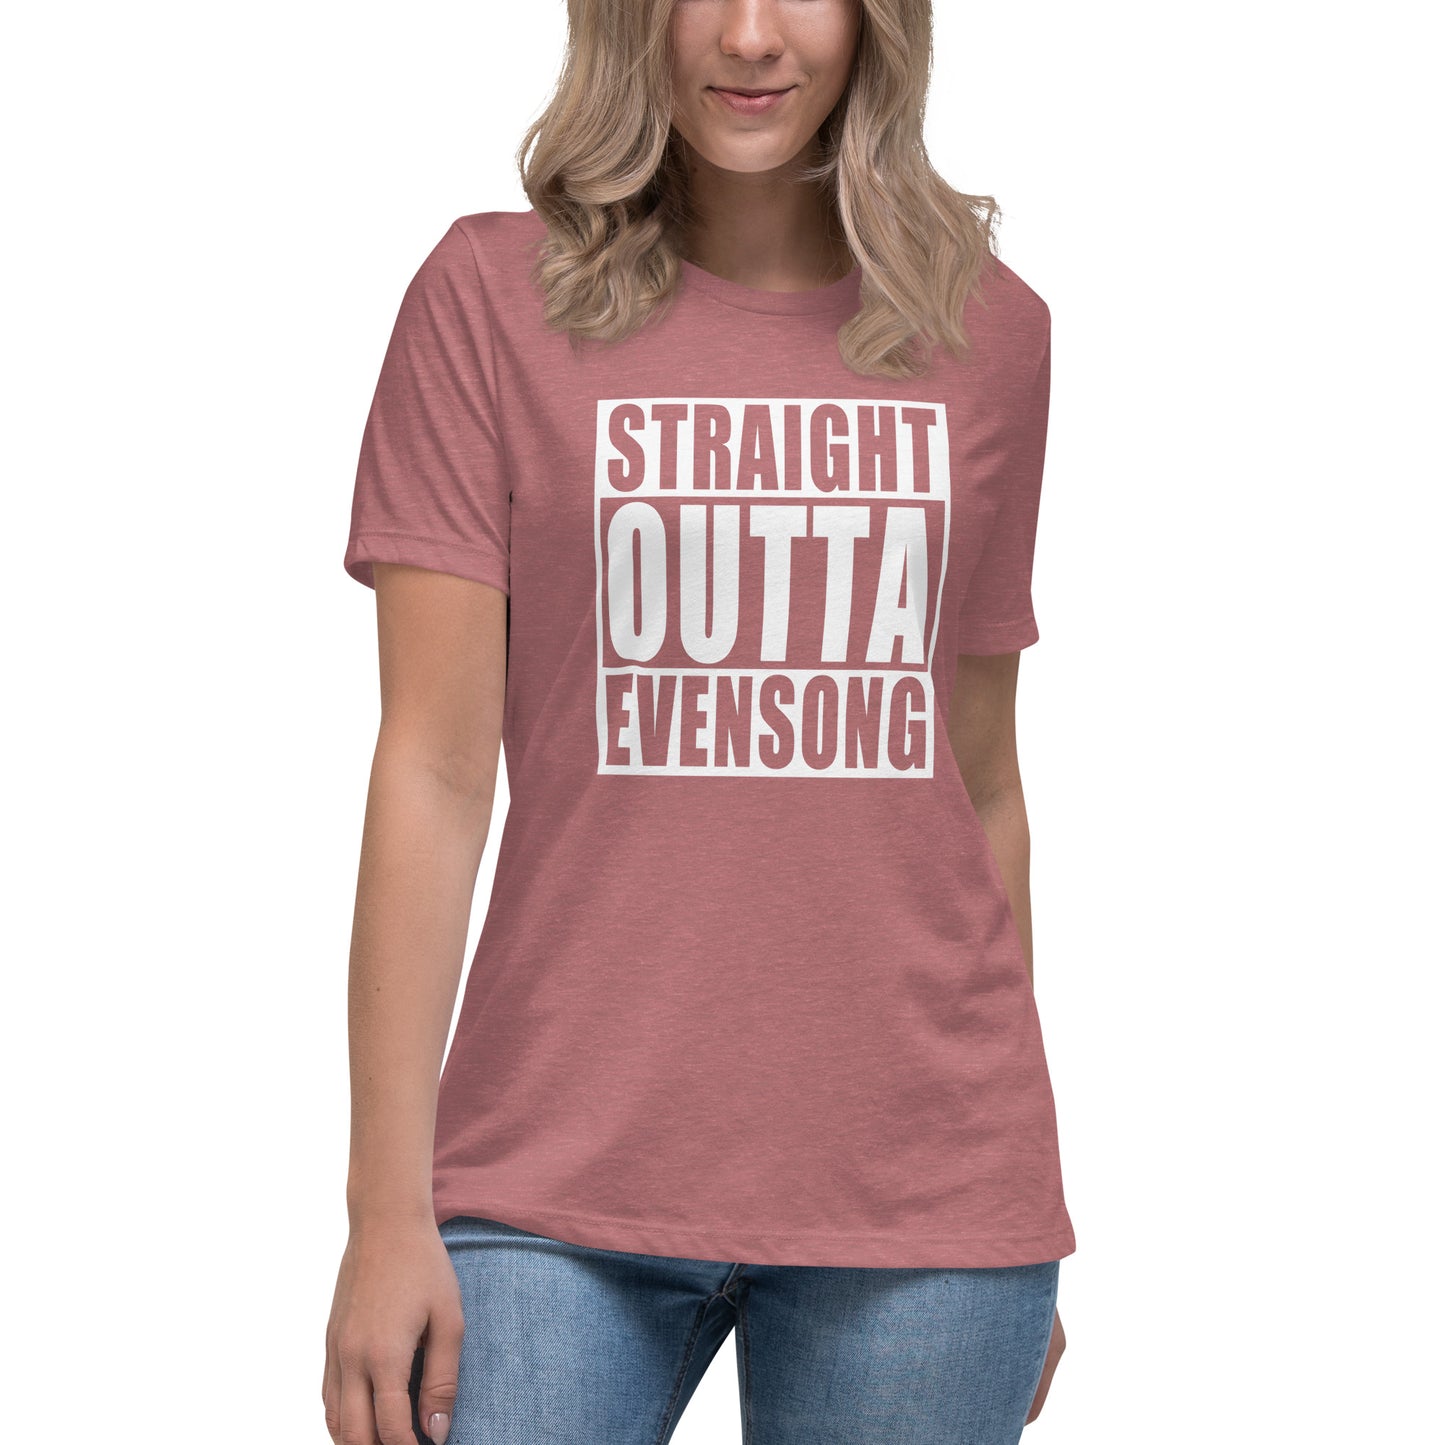 Straight Outta Evensong - Women's Relaxed T-Shirt